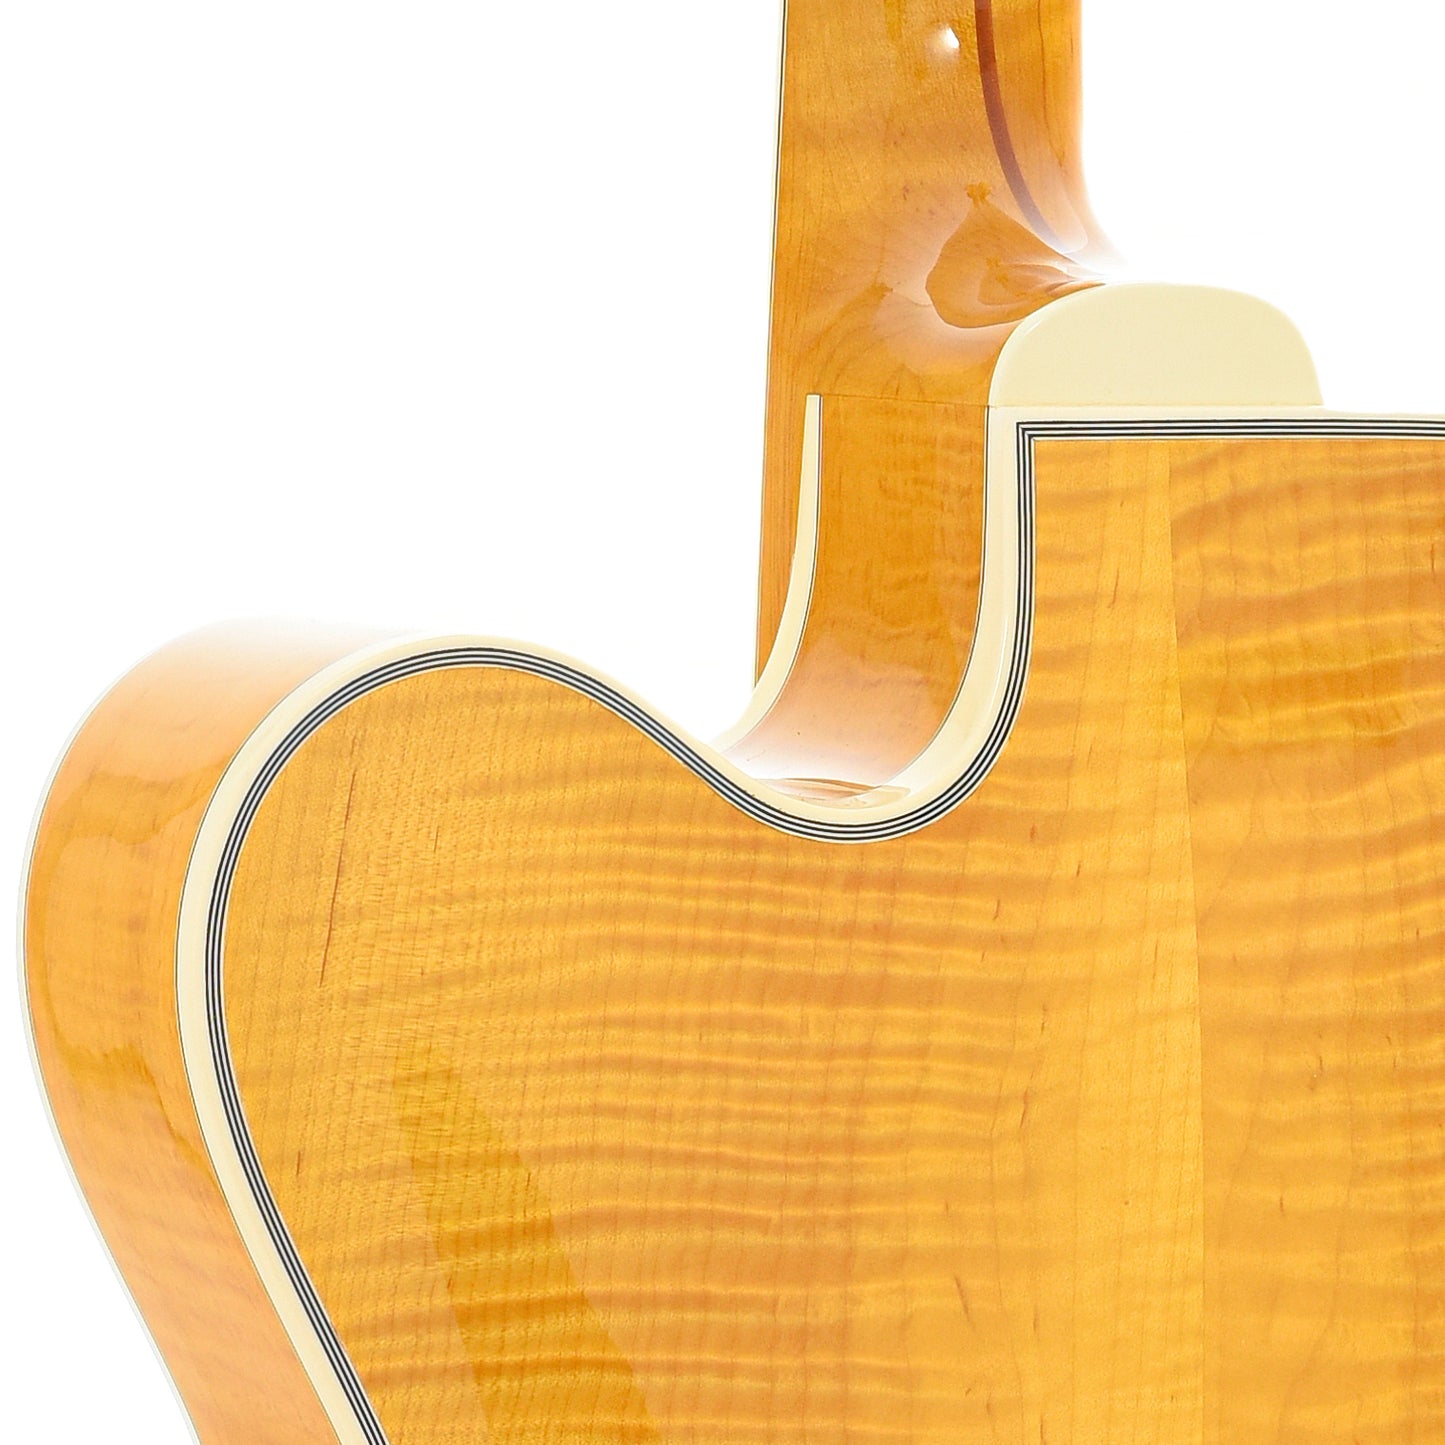 Neck joint of Triggs Custom 17 Archtop Electric Guitar (2010)